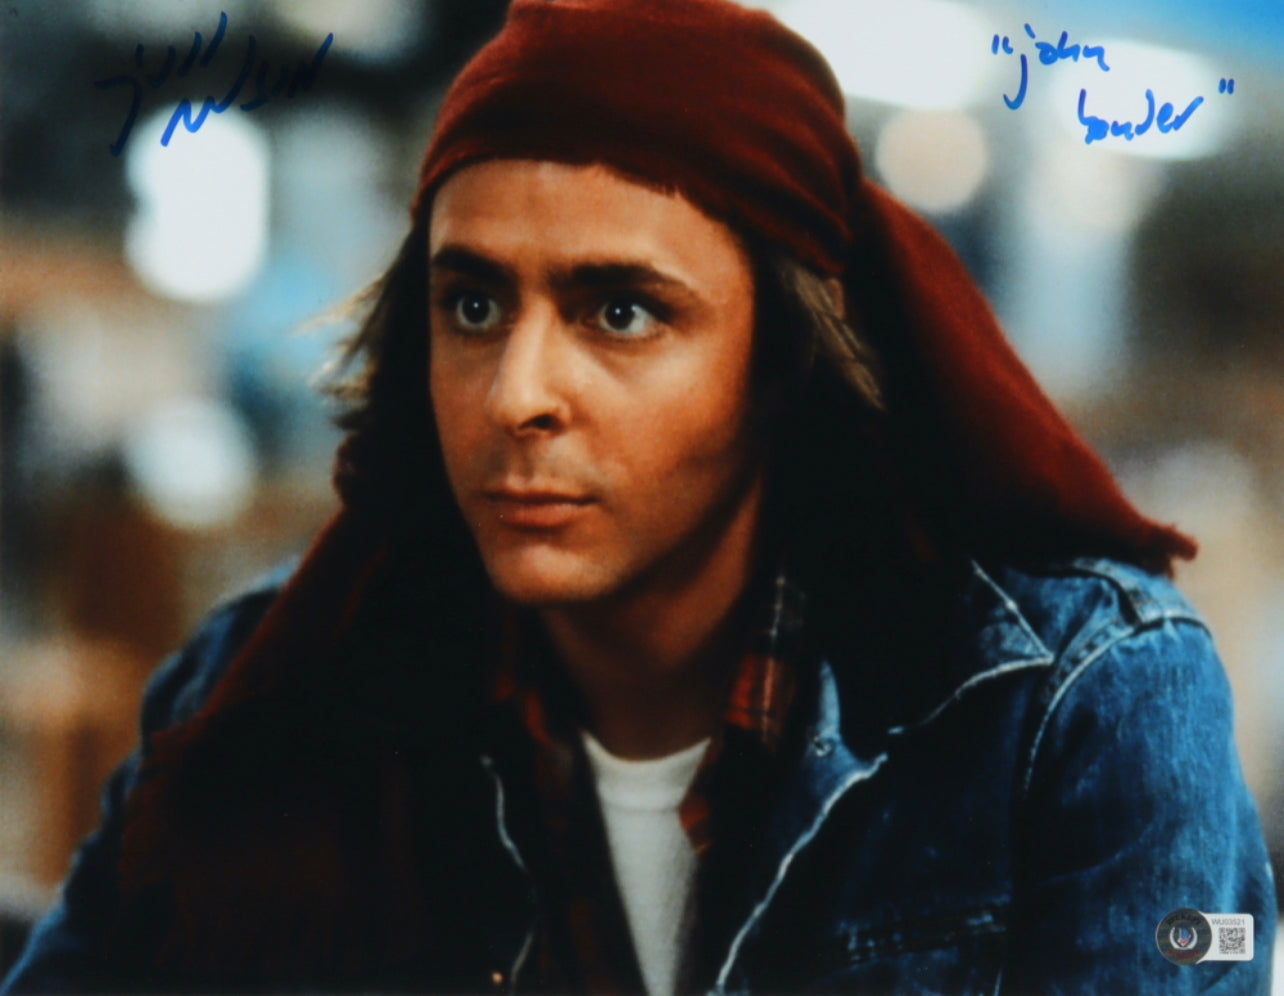 The Breakfast Club - signed by Judd Nelson The Breakfast Club